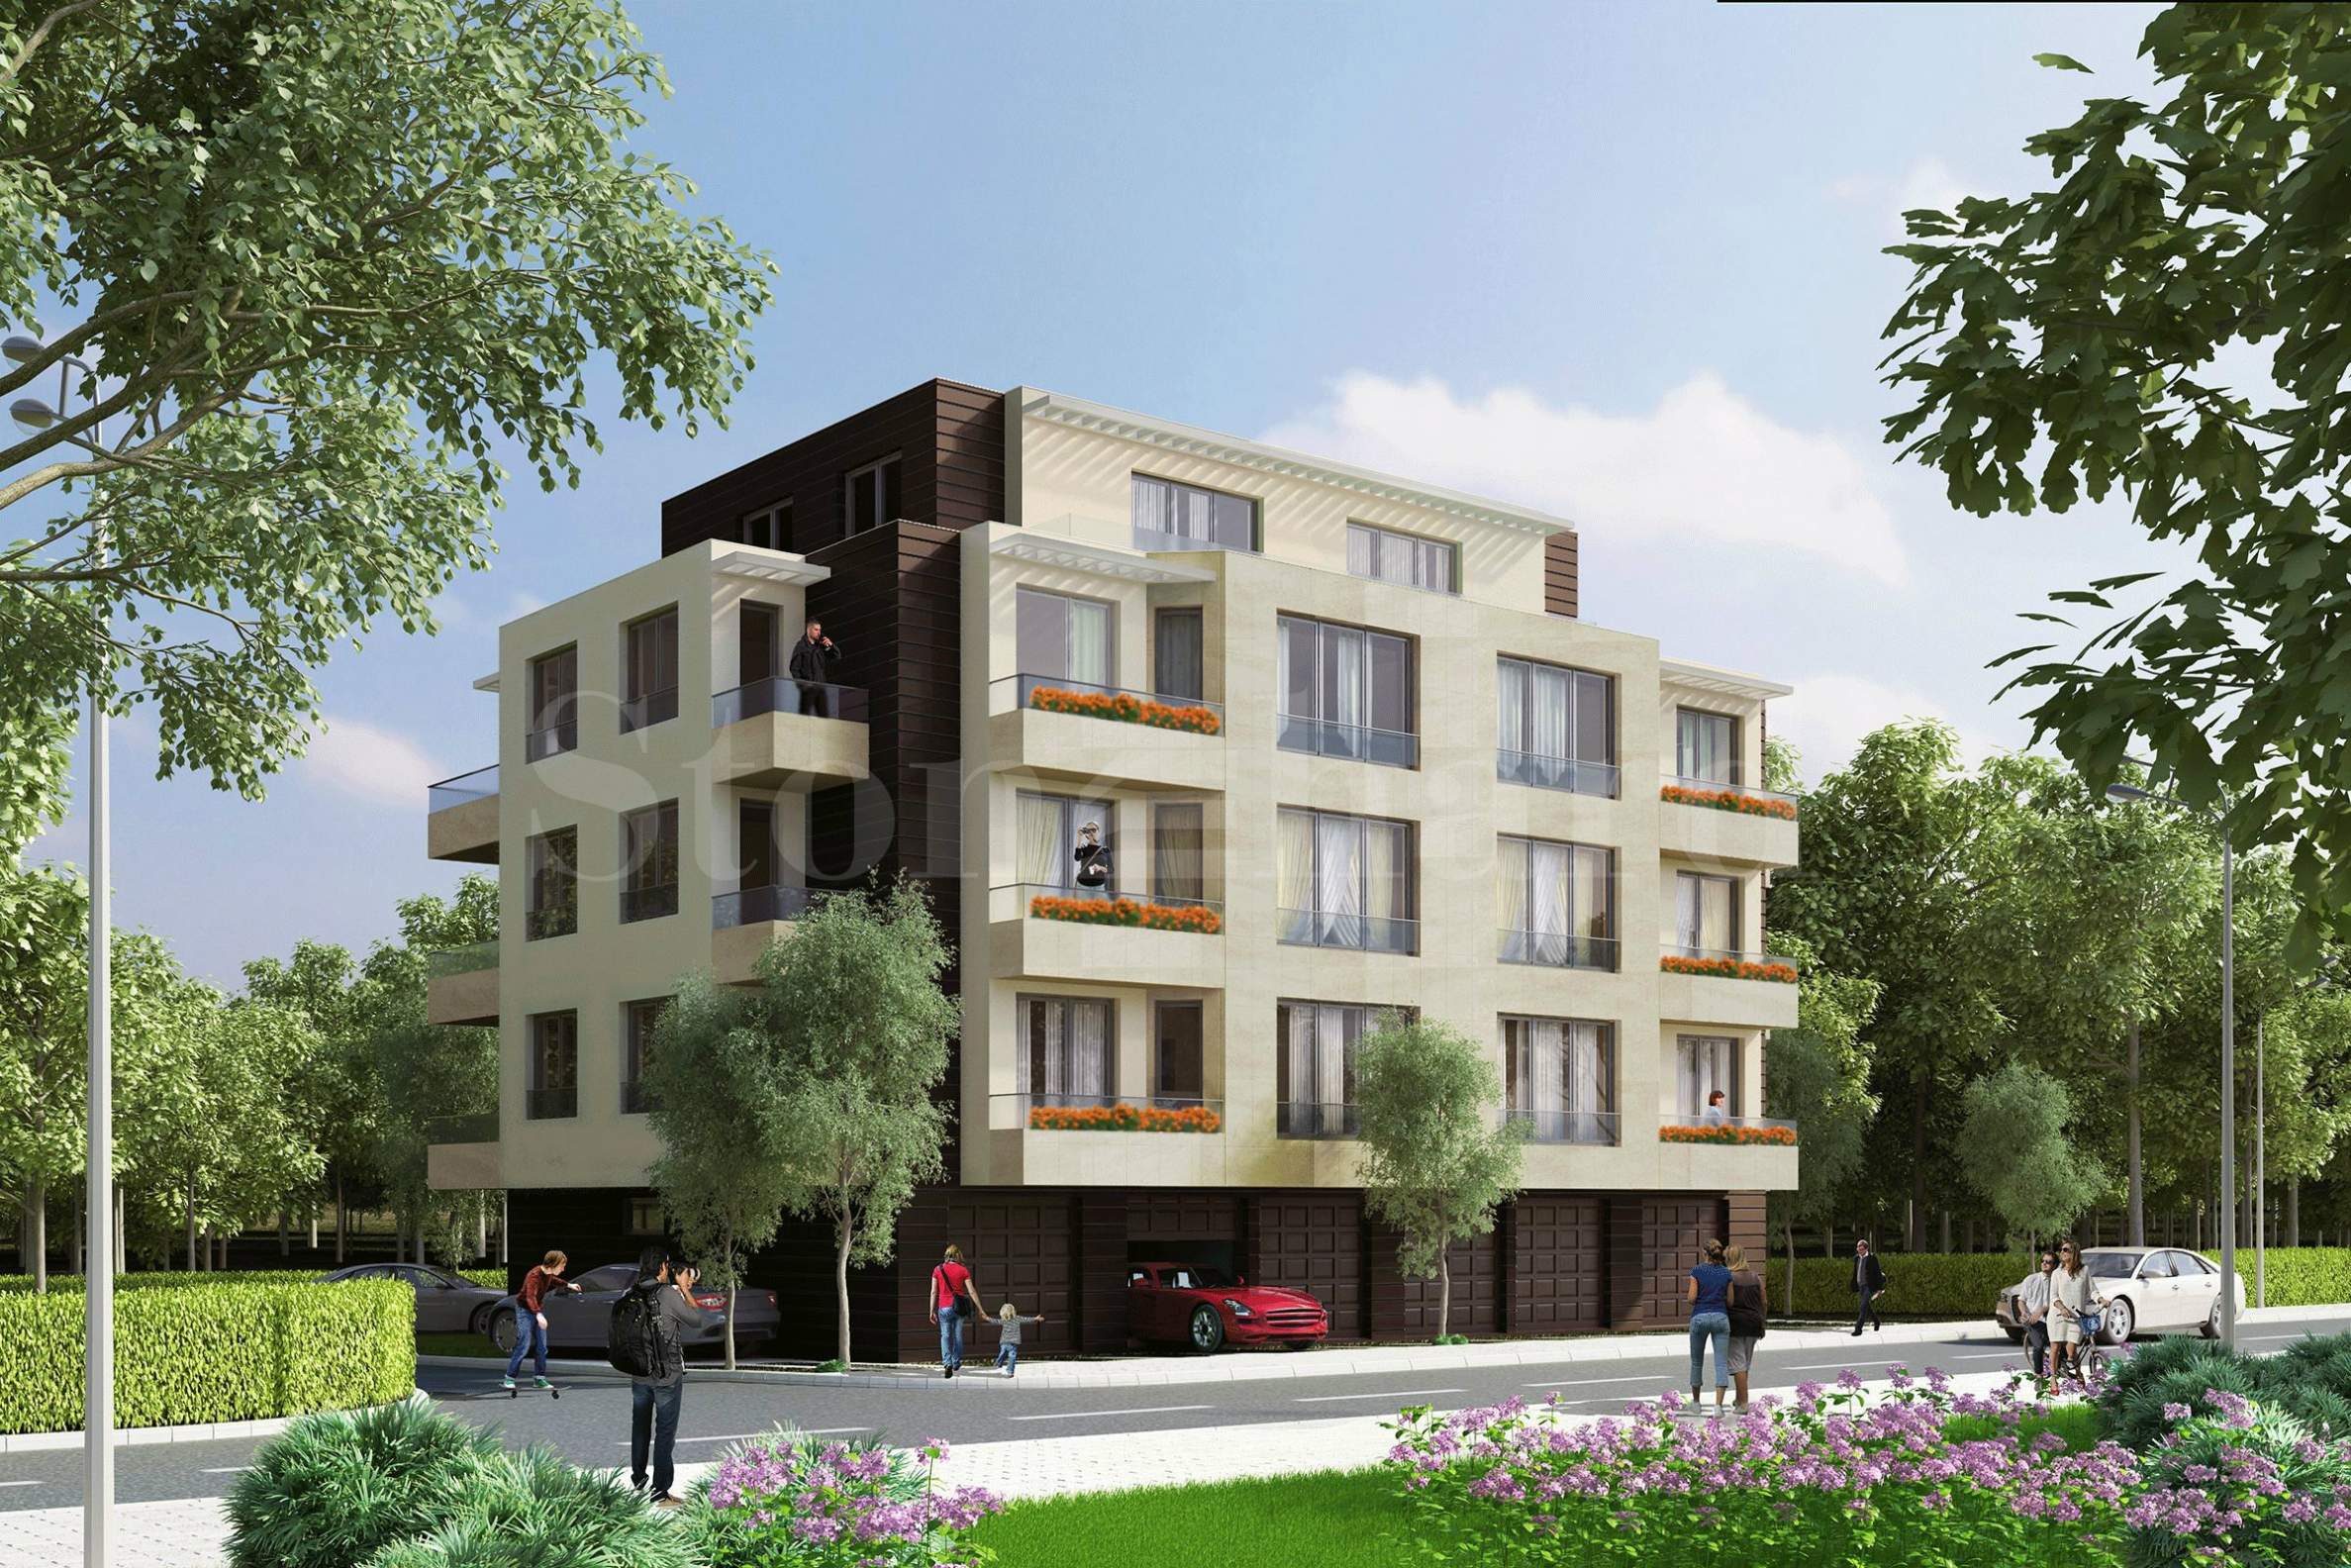 Nice residential building, strategically located in Boyana district2 - Stonehard